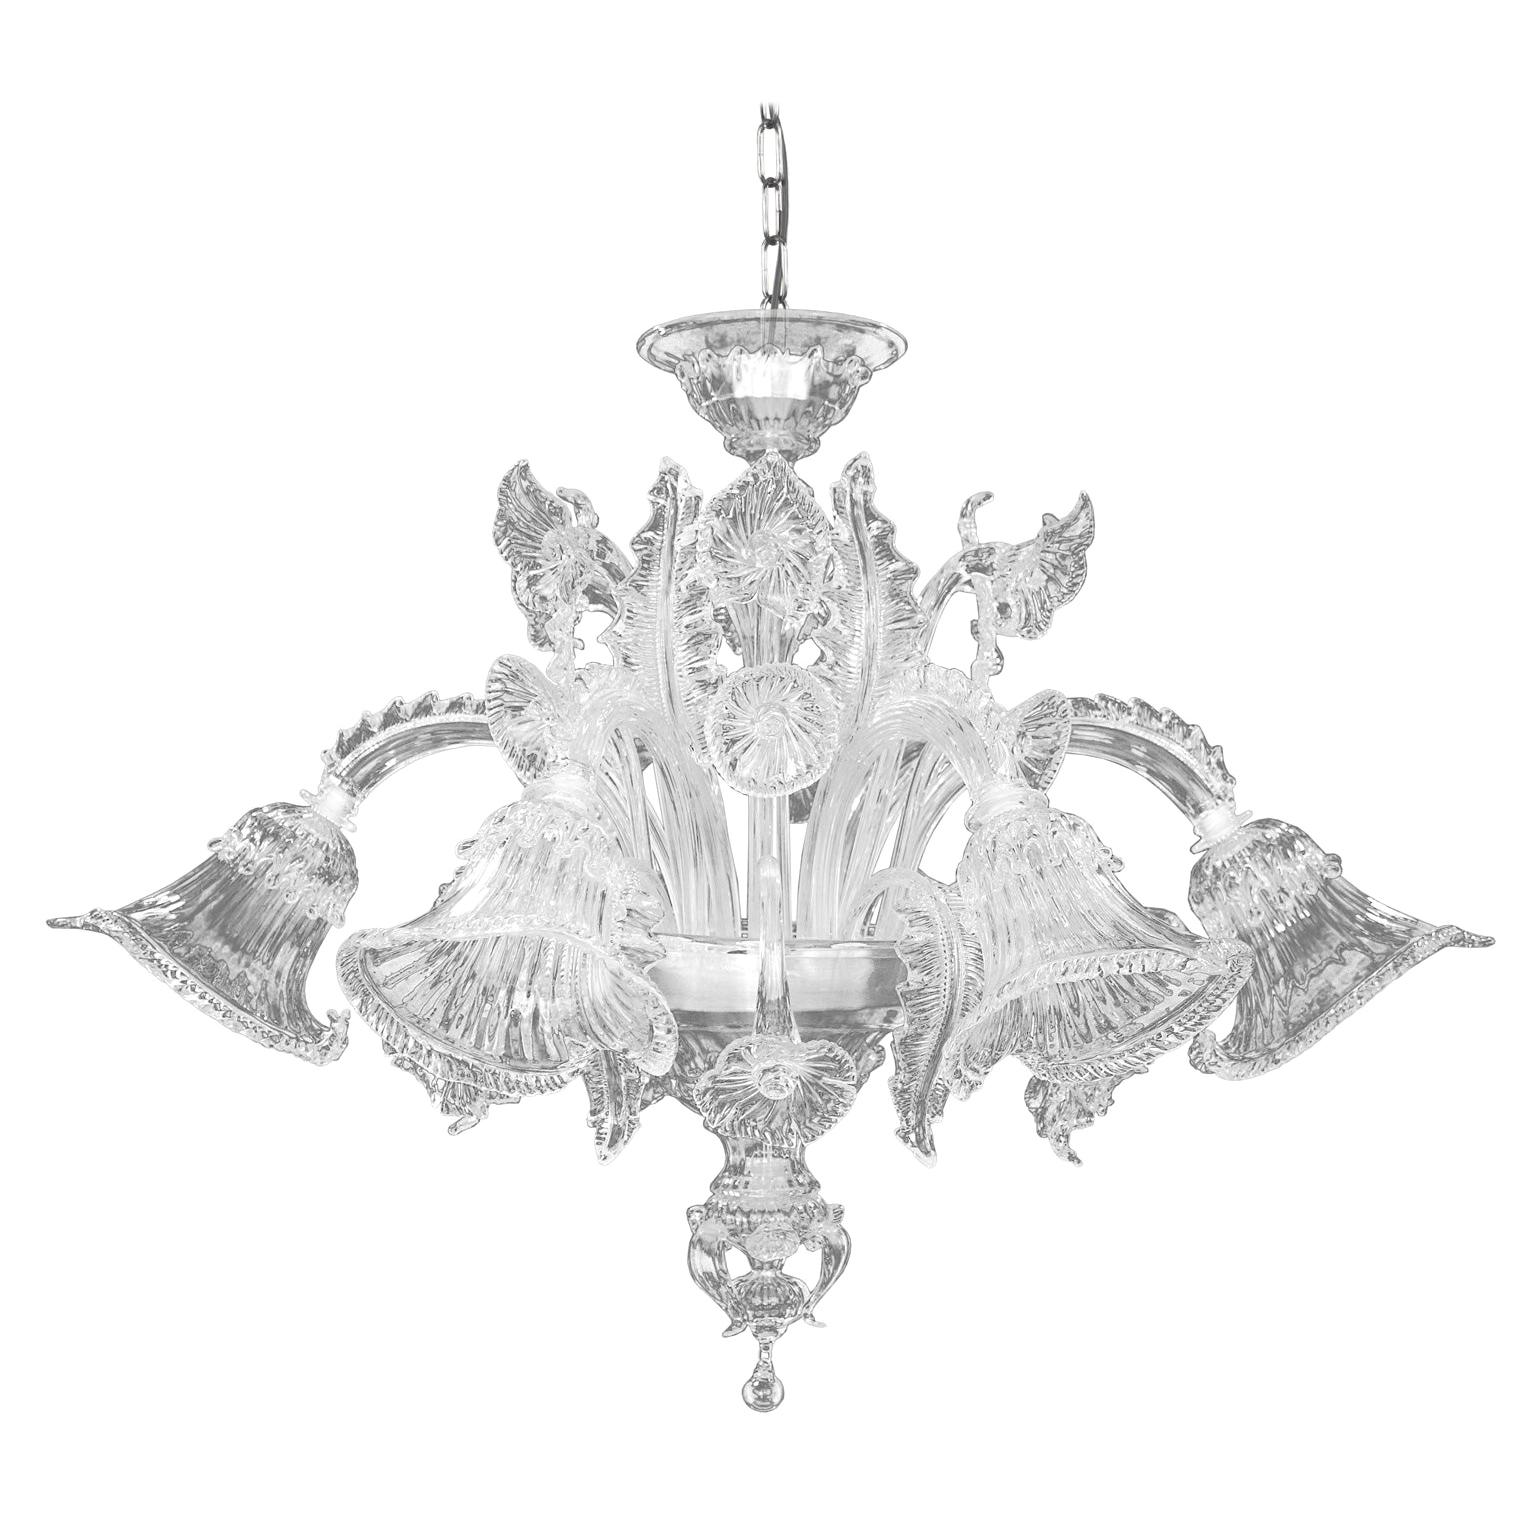 Artistic Ceiling Lamp 6 arms Crystal Murano Glass by Multiforme For Sale